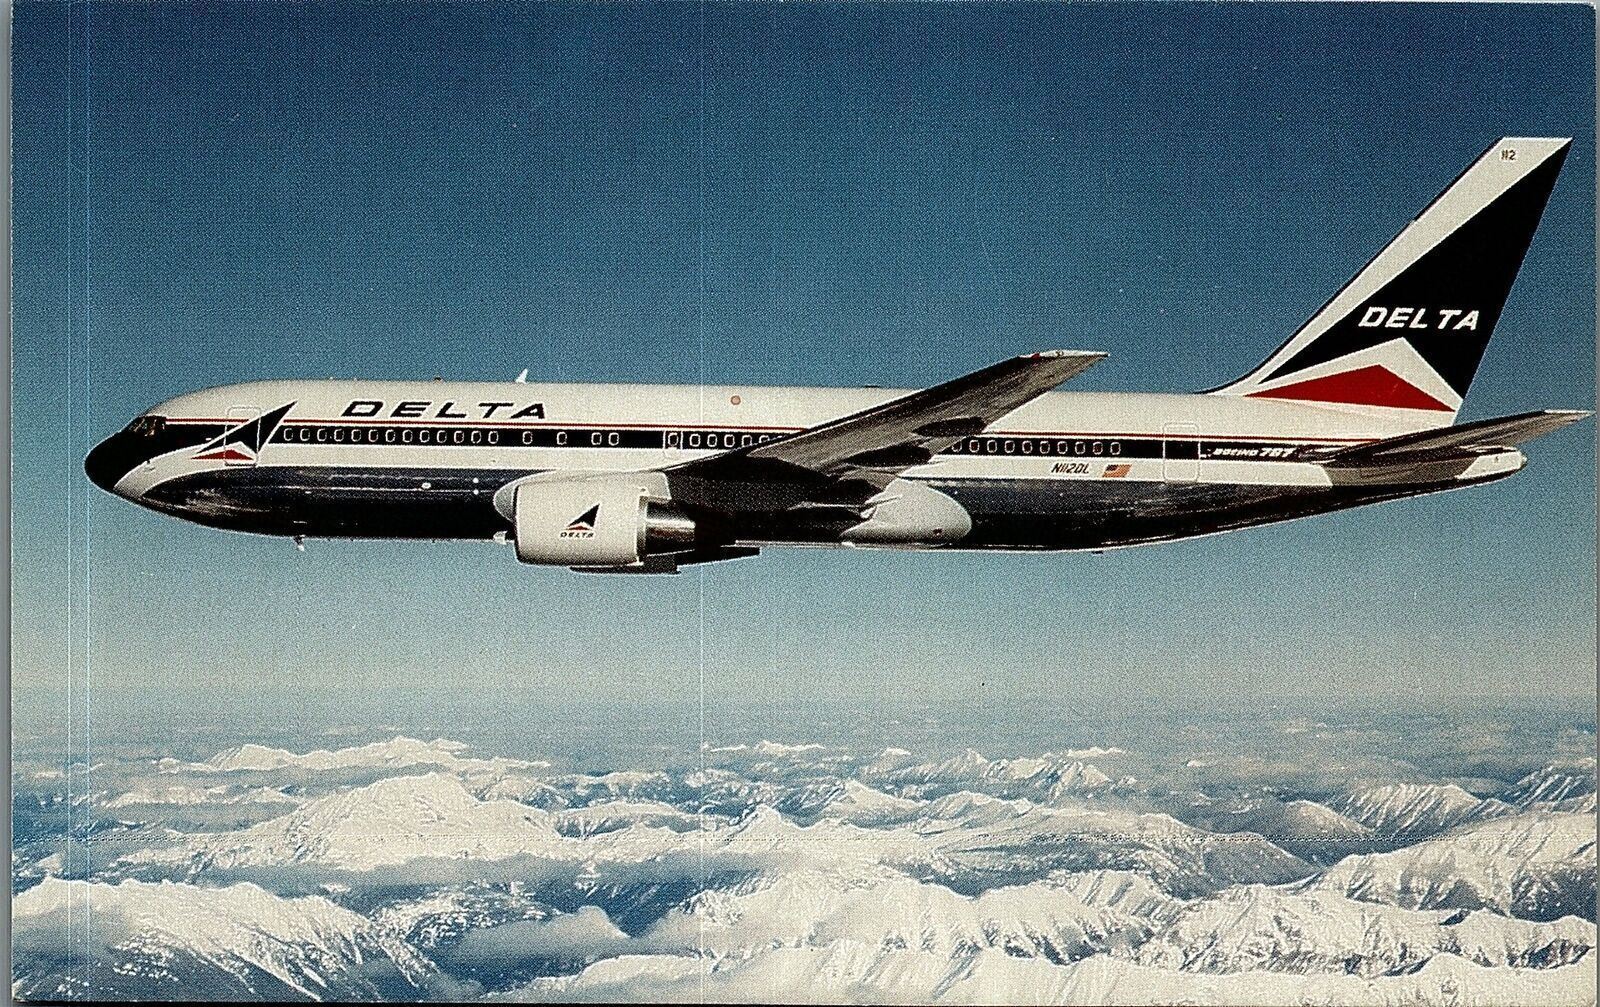 VINTAGE DELTA AIRLINES THE BOEING 767 JET AIRPLANE PHOTOCHROME POSTCARD 38-153